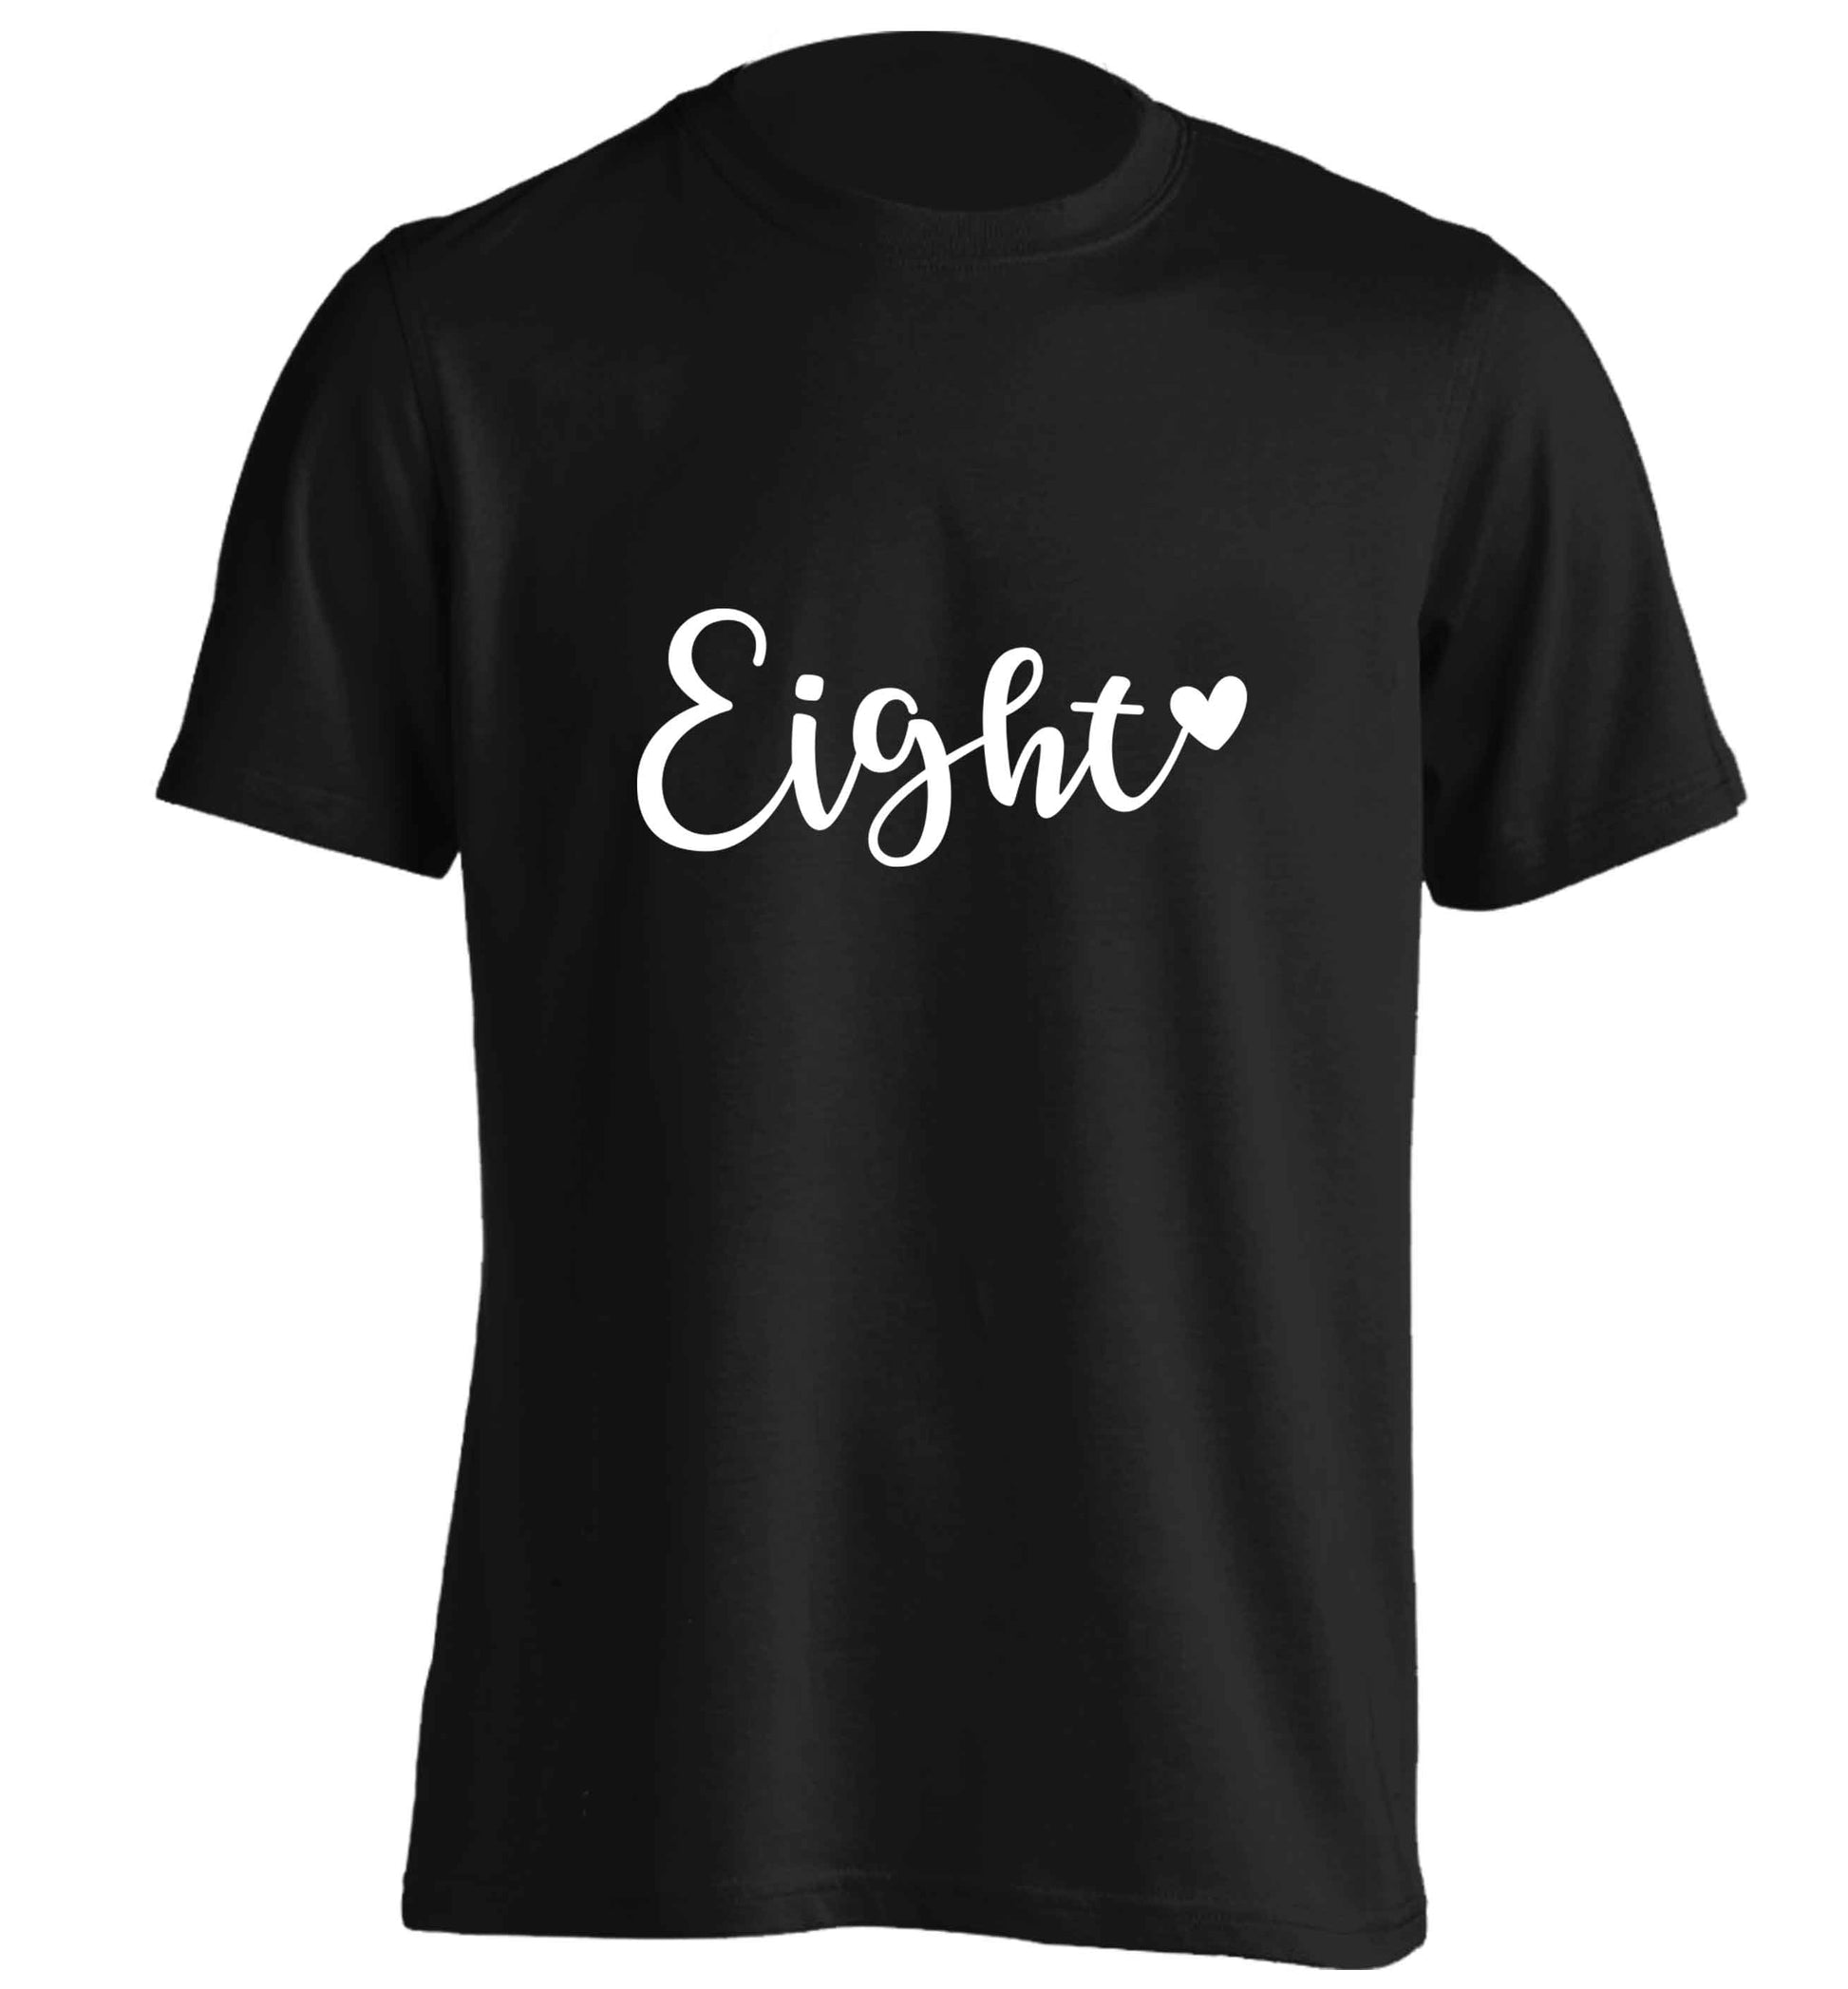 Eight and heart adults unisex black Tshirt 2XL